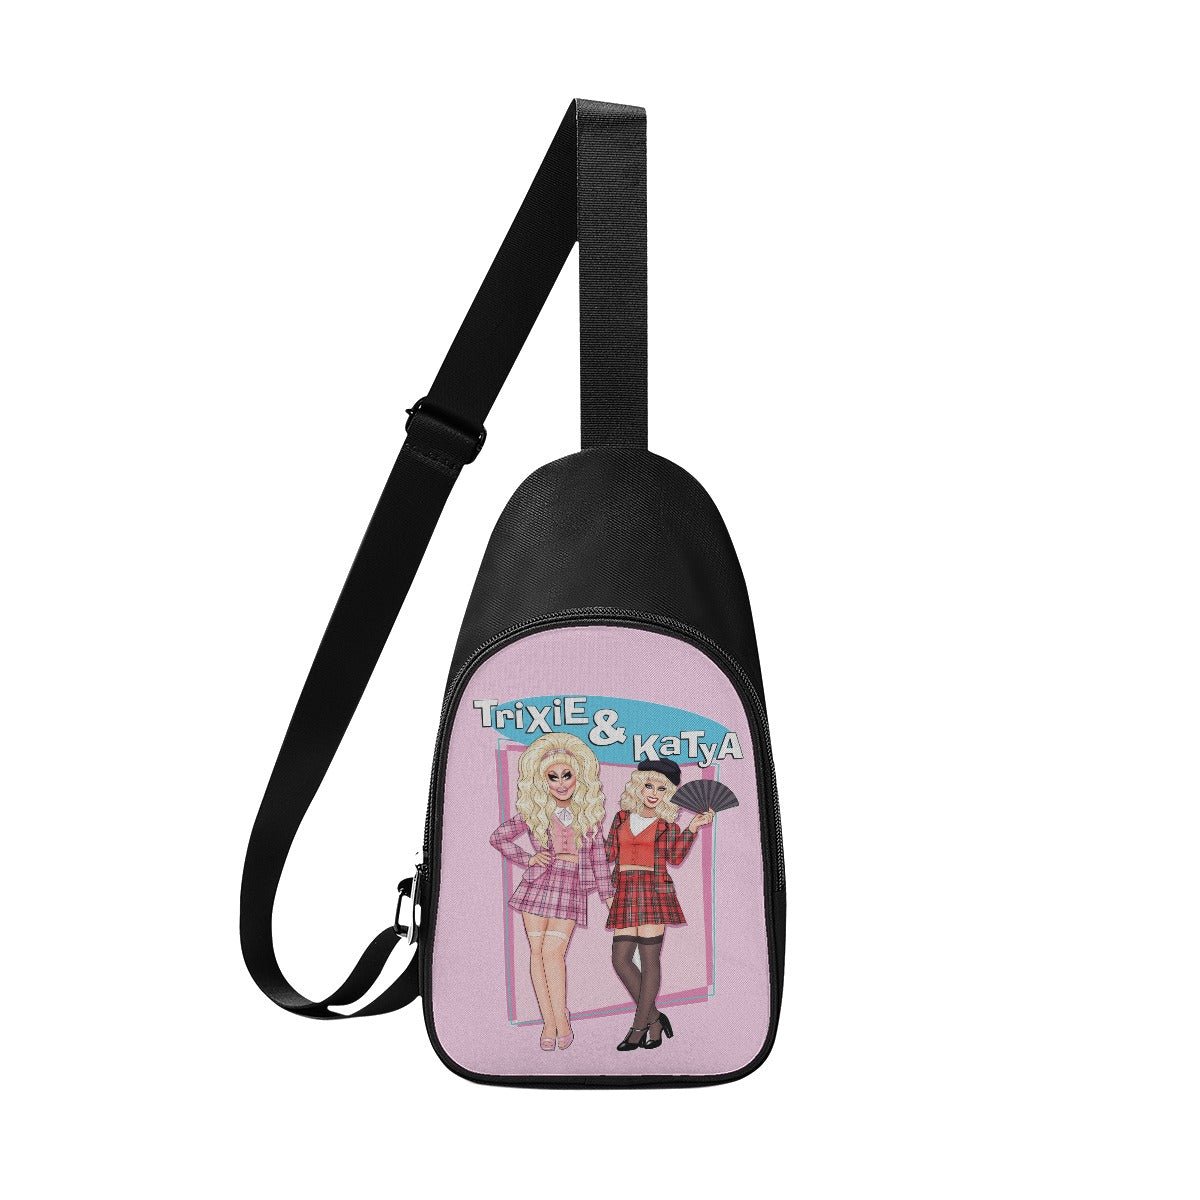 Trixie & Katya - Clueless Shoulder Bag - dragqueenmerch